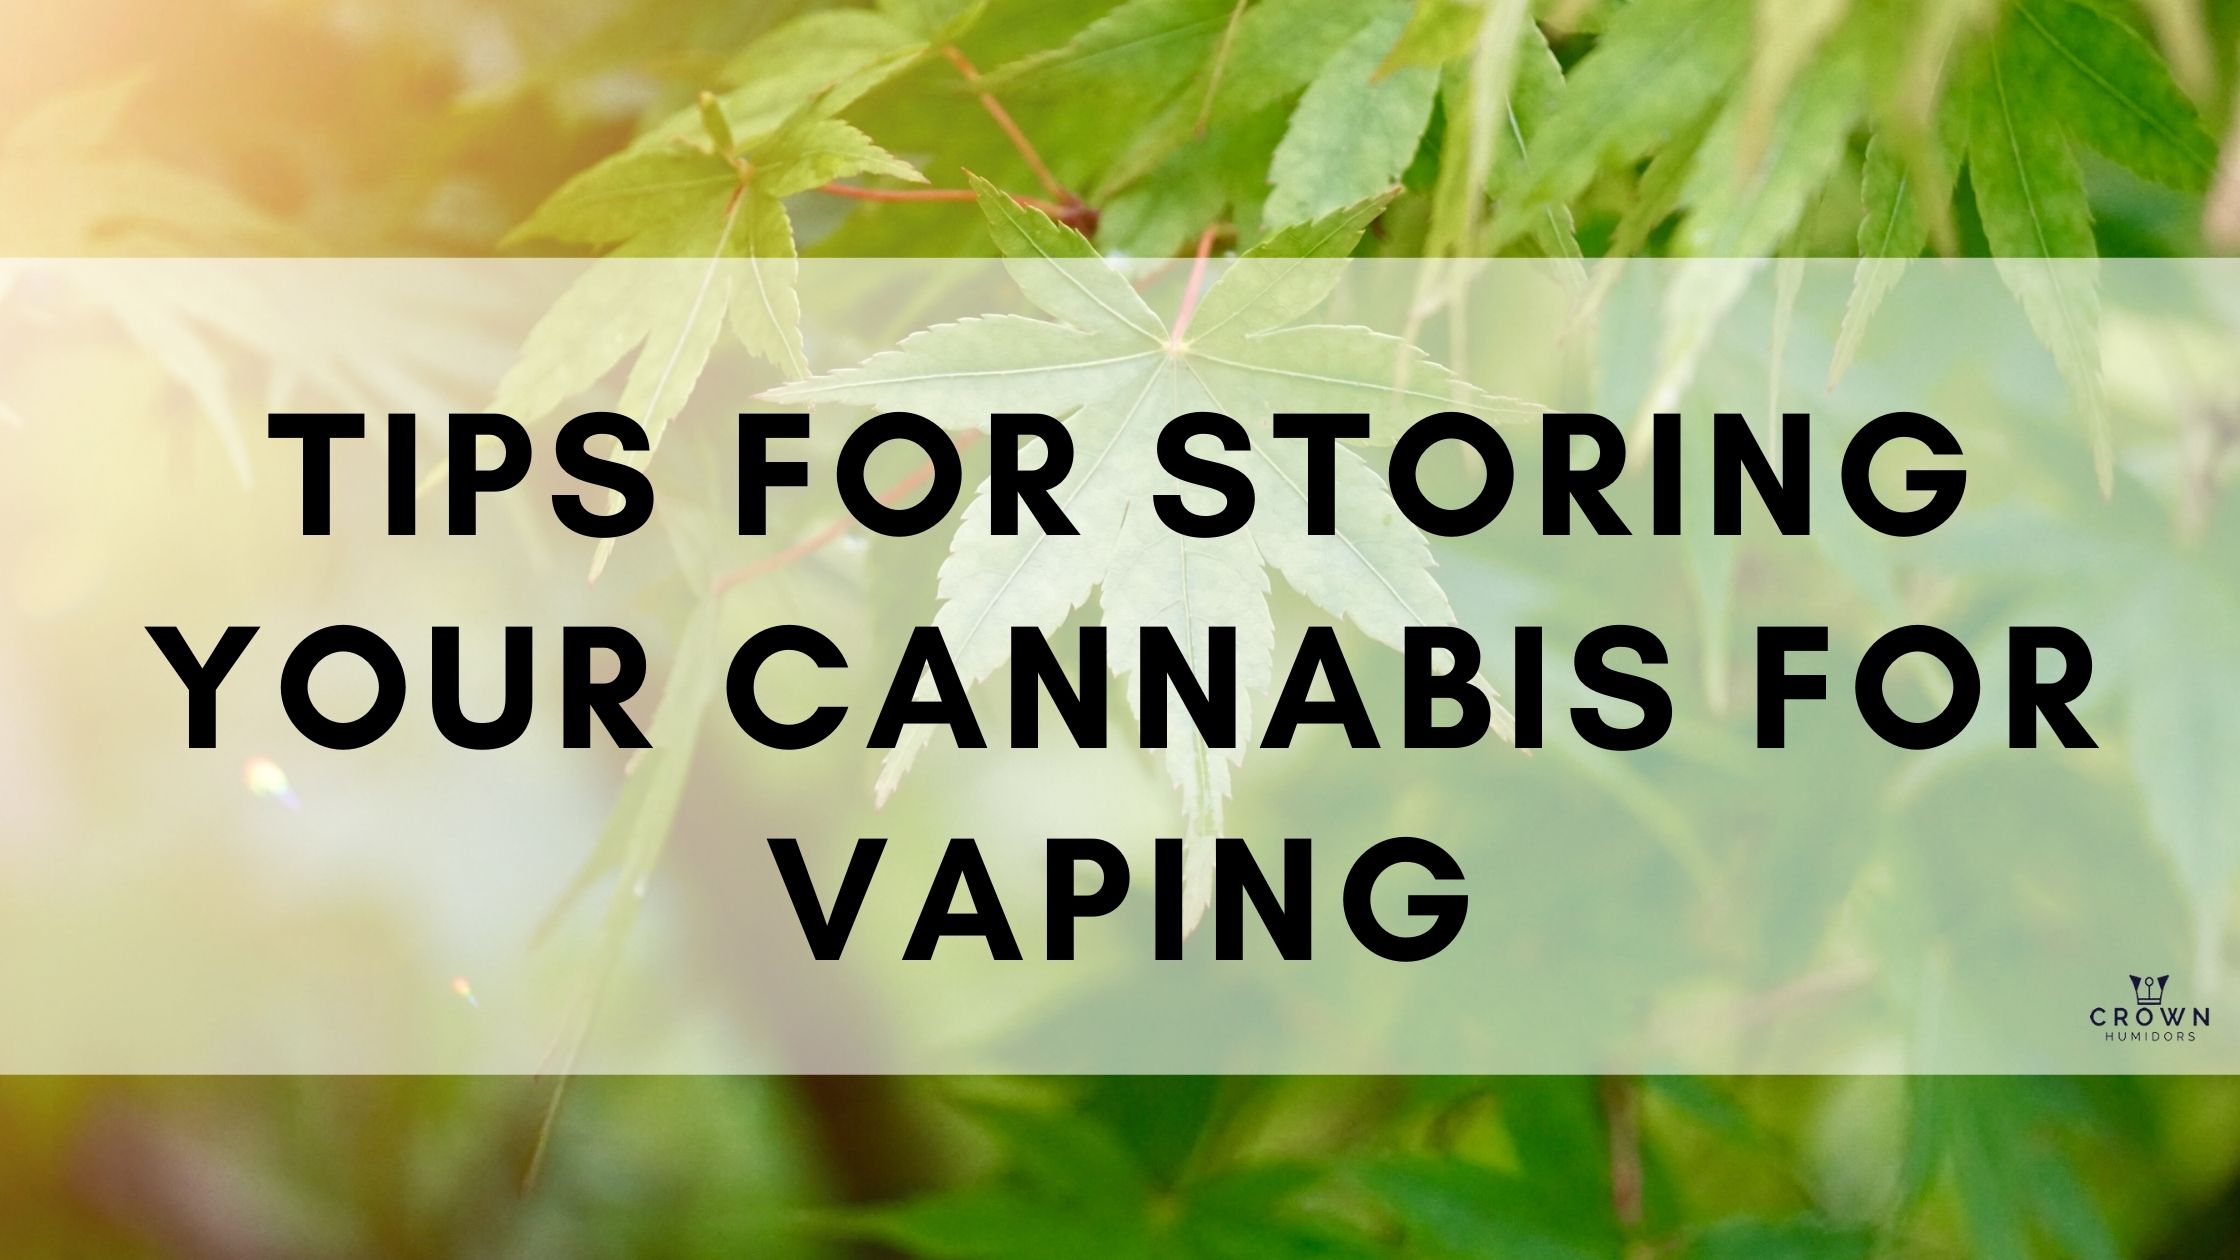 Tips for storing your cannabis for vaping